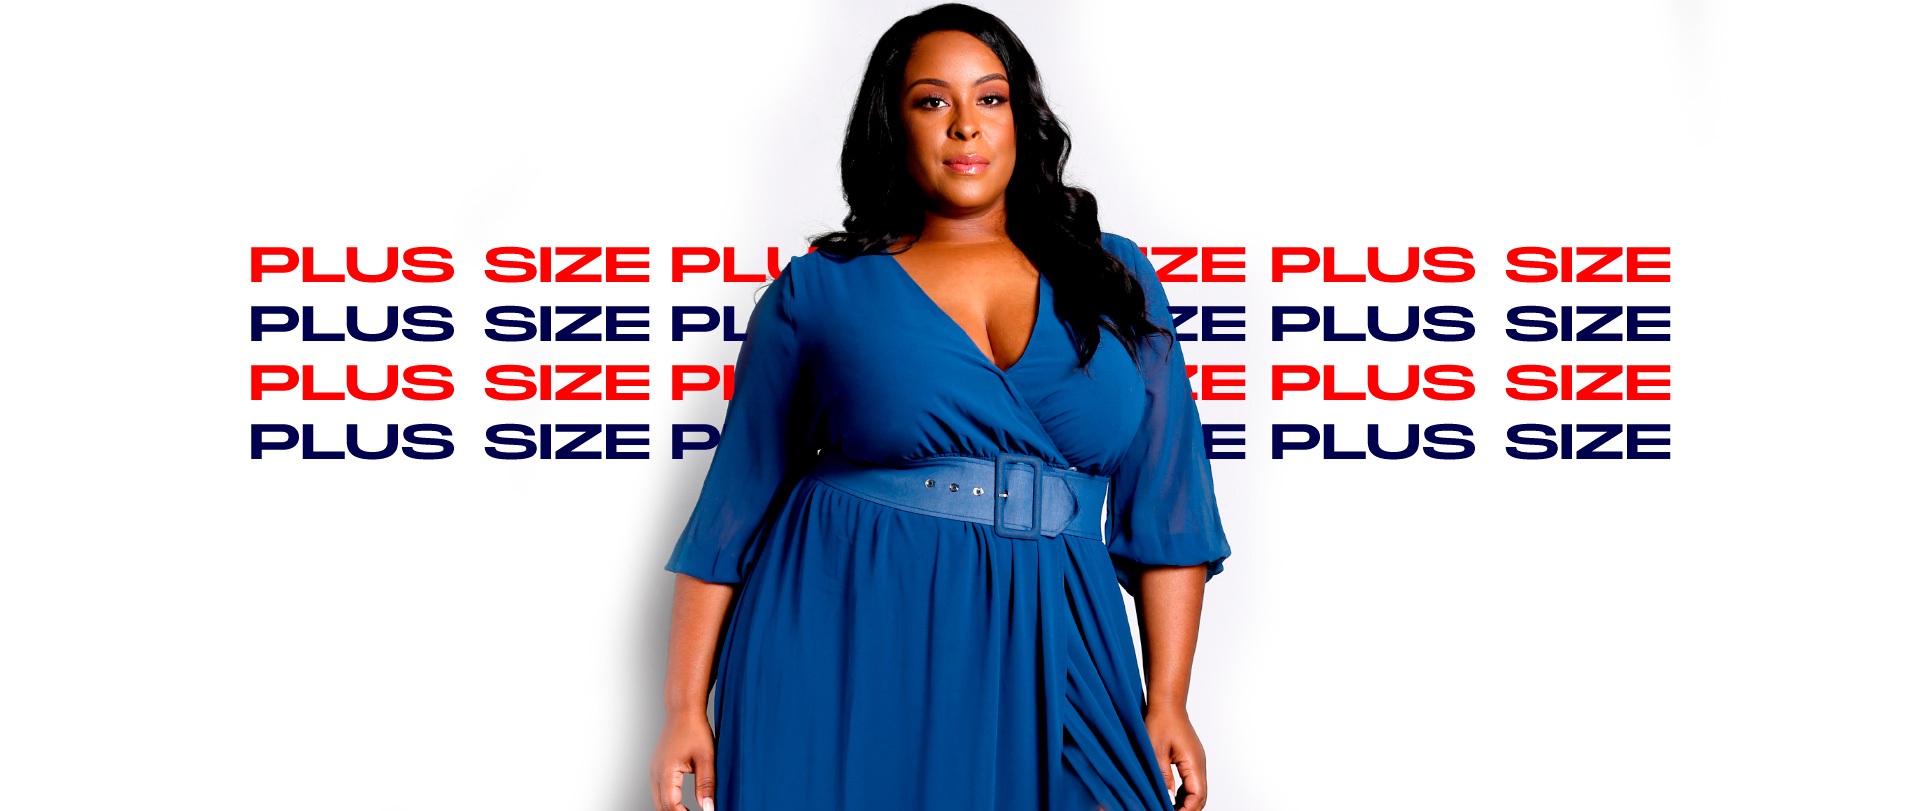 High Fashion Plus Size Apparel for Women  Poetic Justice: Designer Brand  for Curves & Black Girl Magic